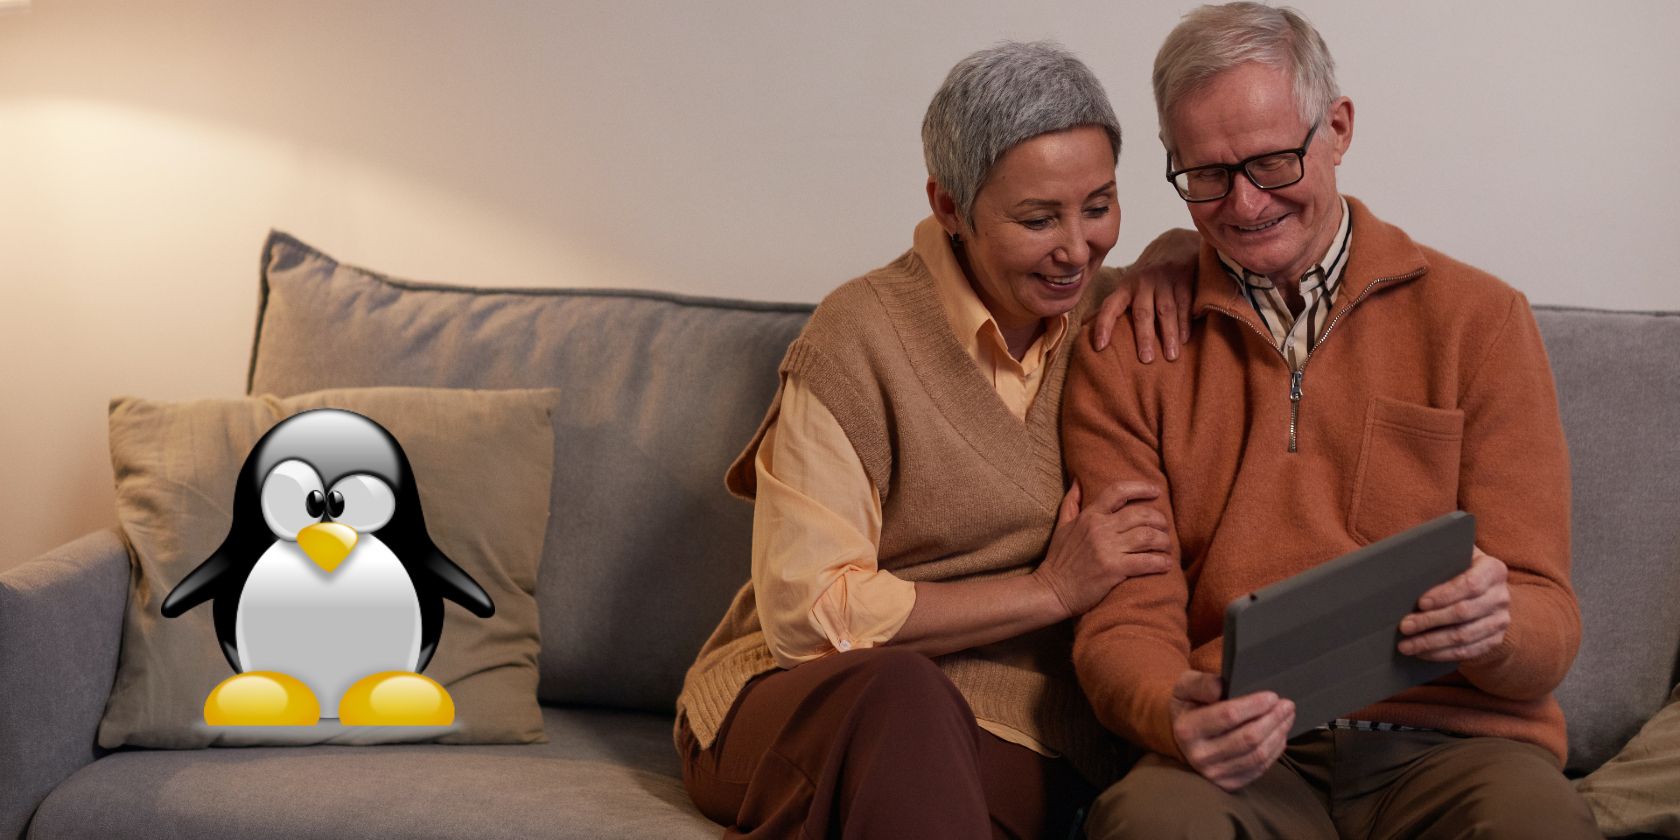 An elderly couple sitting on a sofa using a tablet